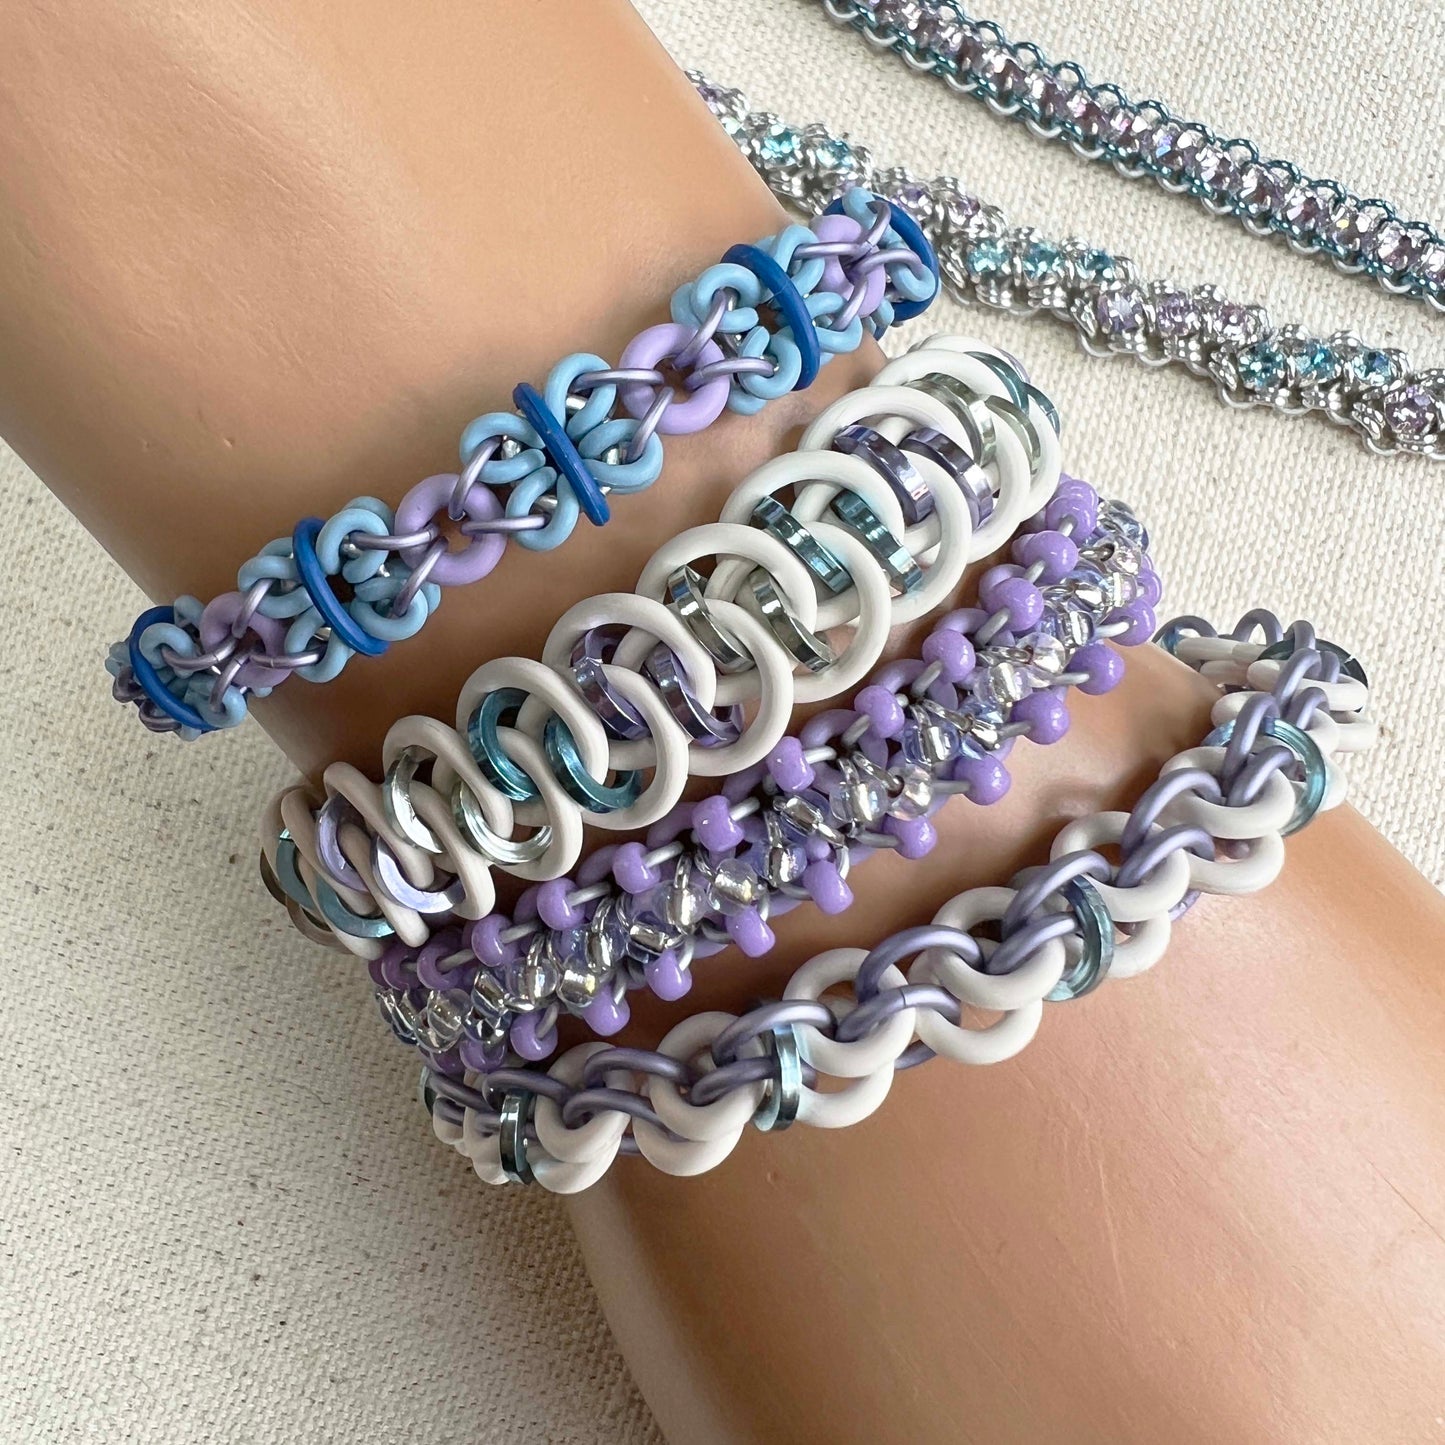 Dimensional Butterfly Stretch Bracelet kit with FREE video - Blue and Purple